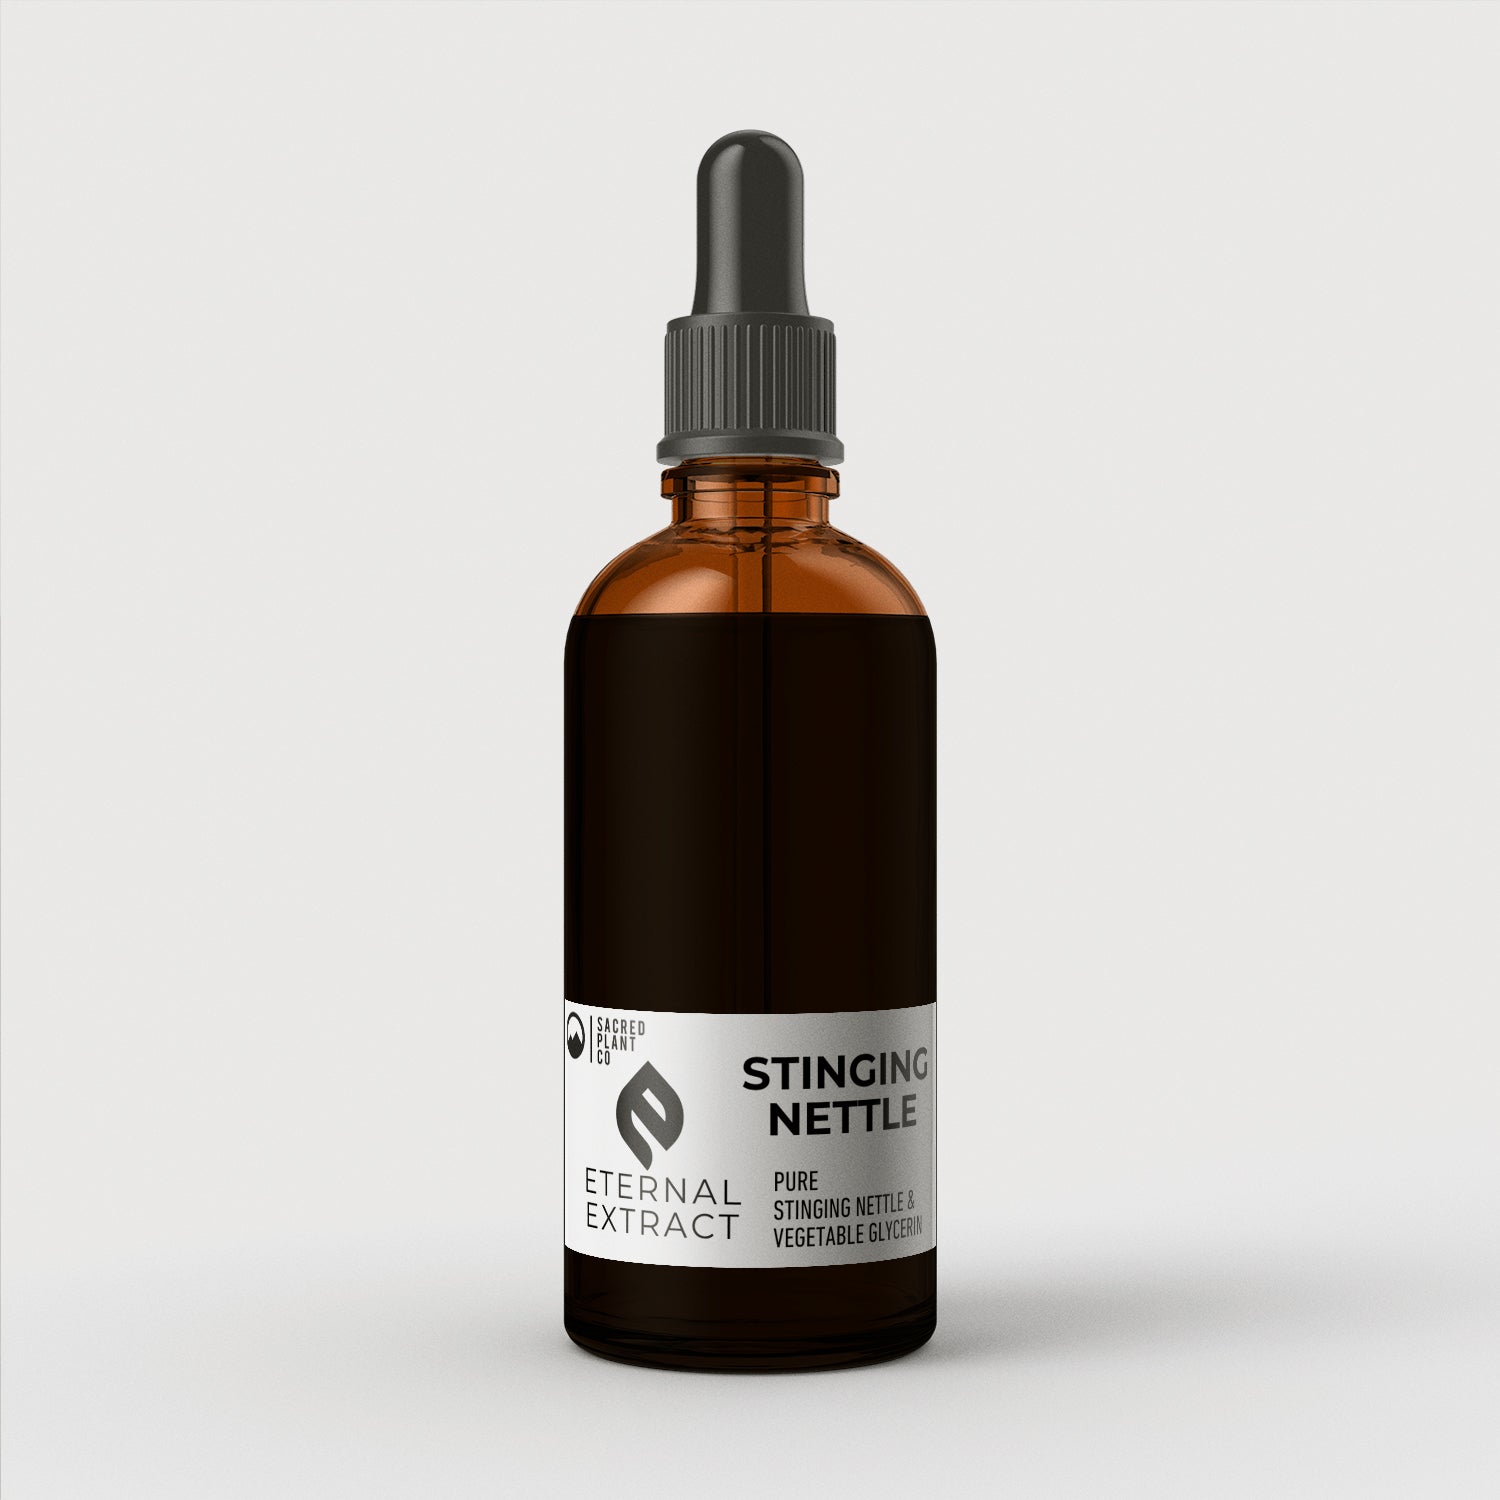 A 30ml bottle of Sacred Plant Co Eternal Stinging Nettle Extract Tincture with a black dropper, standing upright on a plain surface.